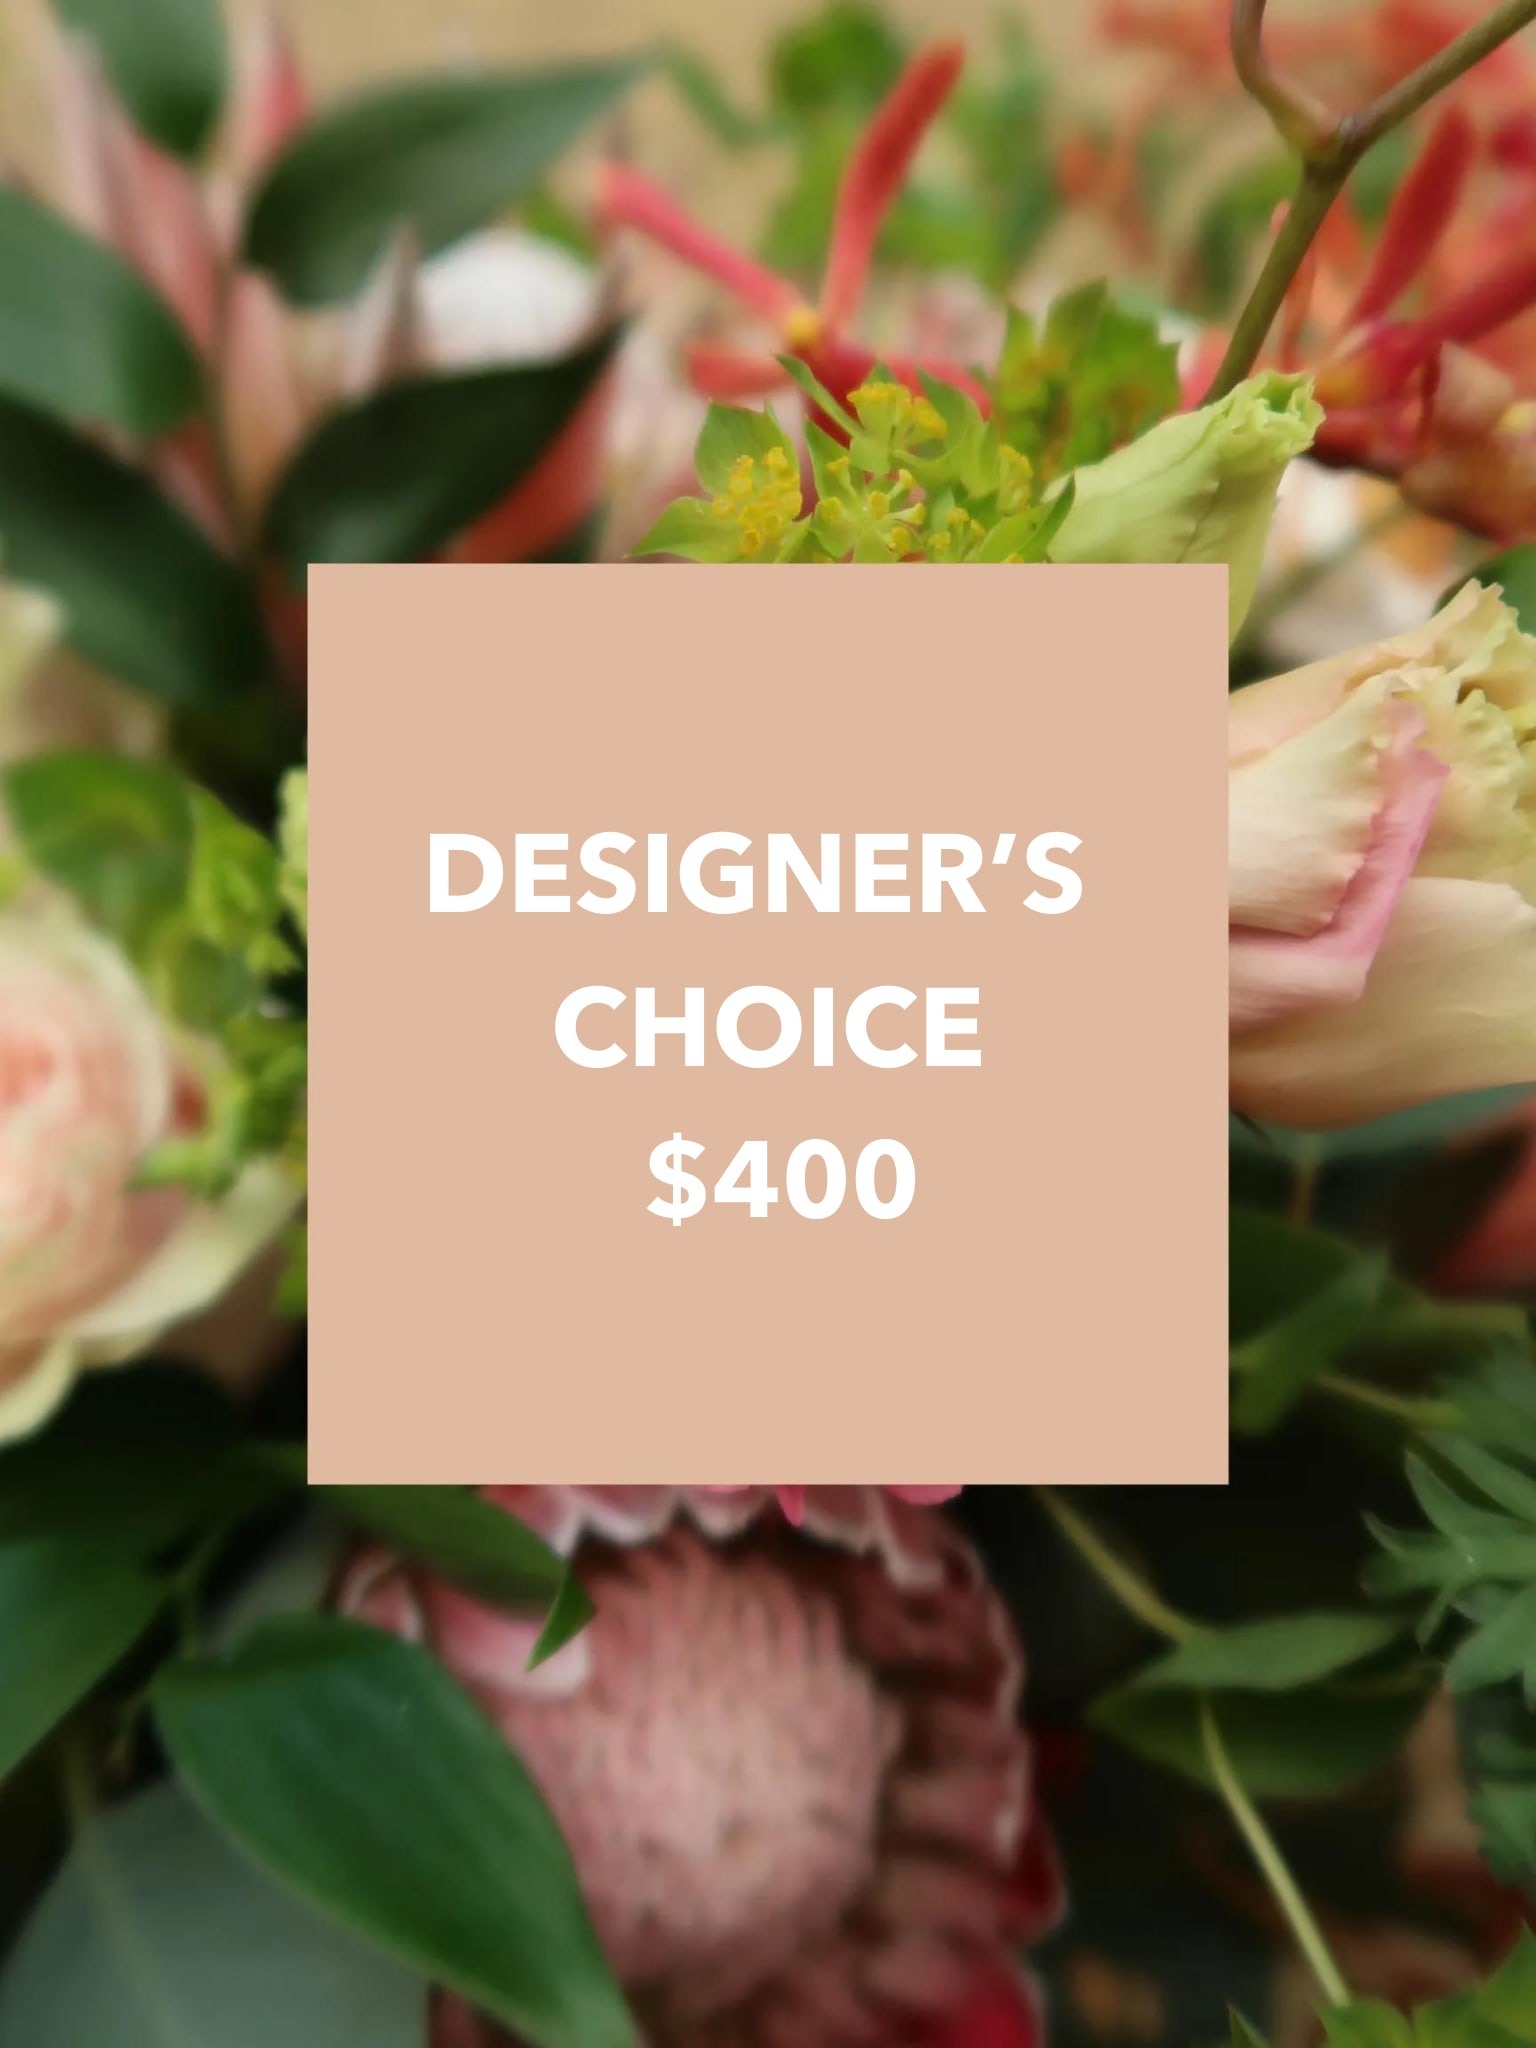 AG6 Designers Choice - Let our amazing designers create a custom piece with the best seasonal flowers and tones that are sure to impress.